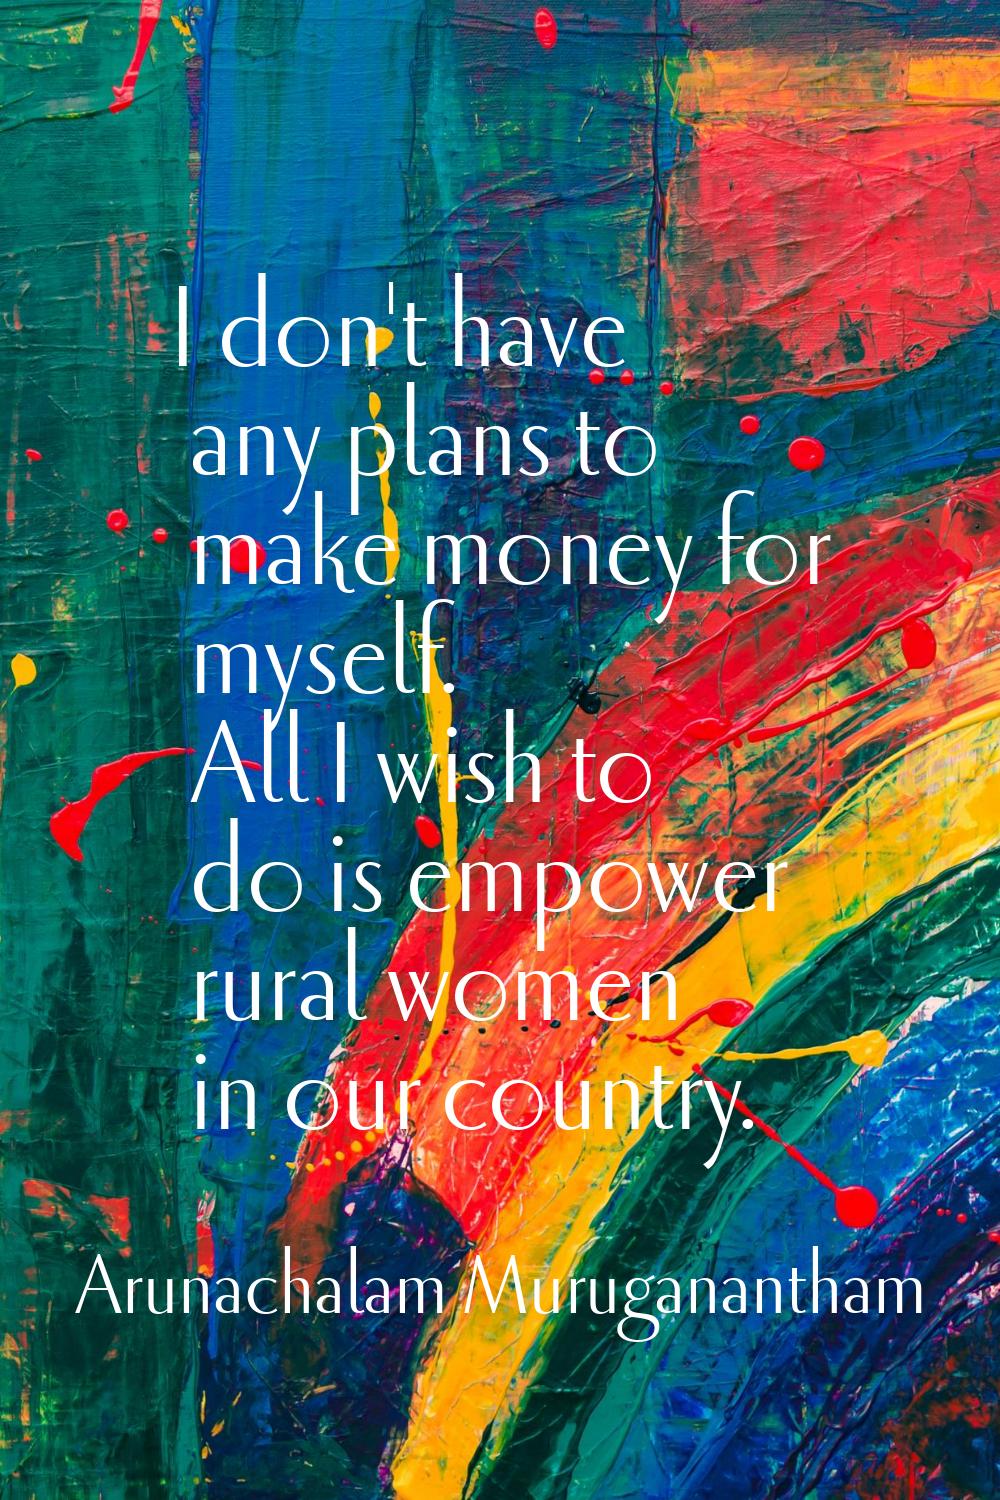 I don't have any plans to make money for myself. All I wish to do is empower rural women in our cou